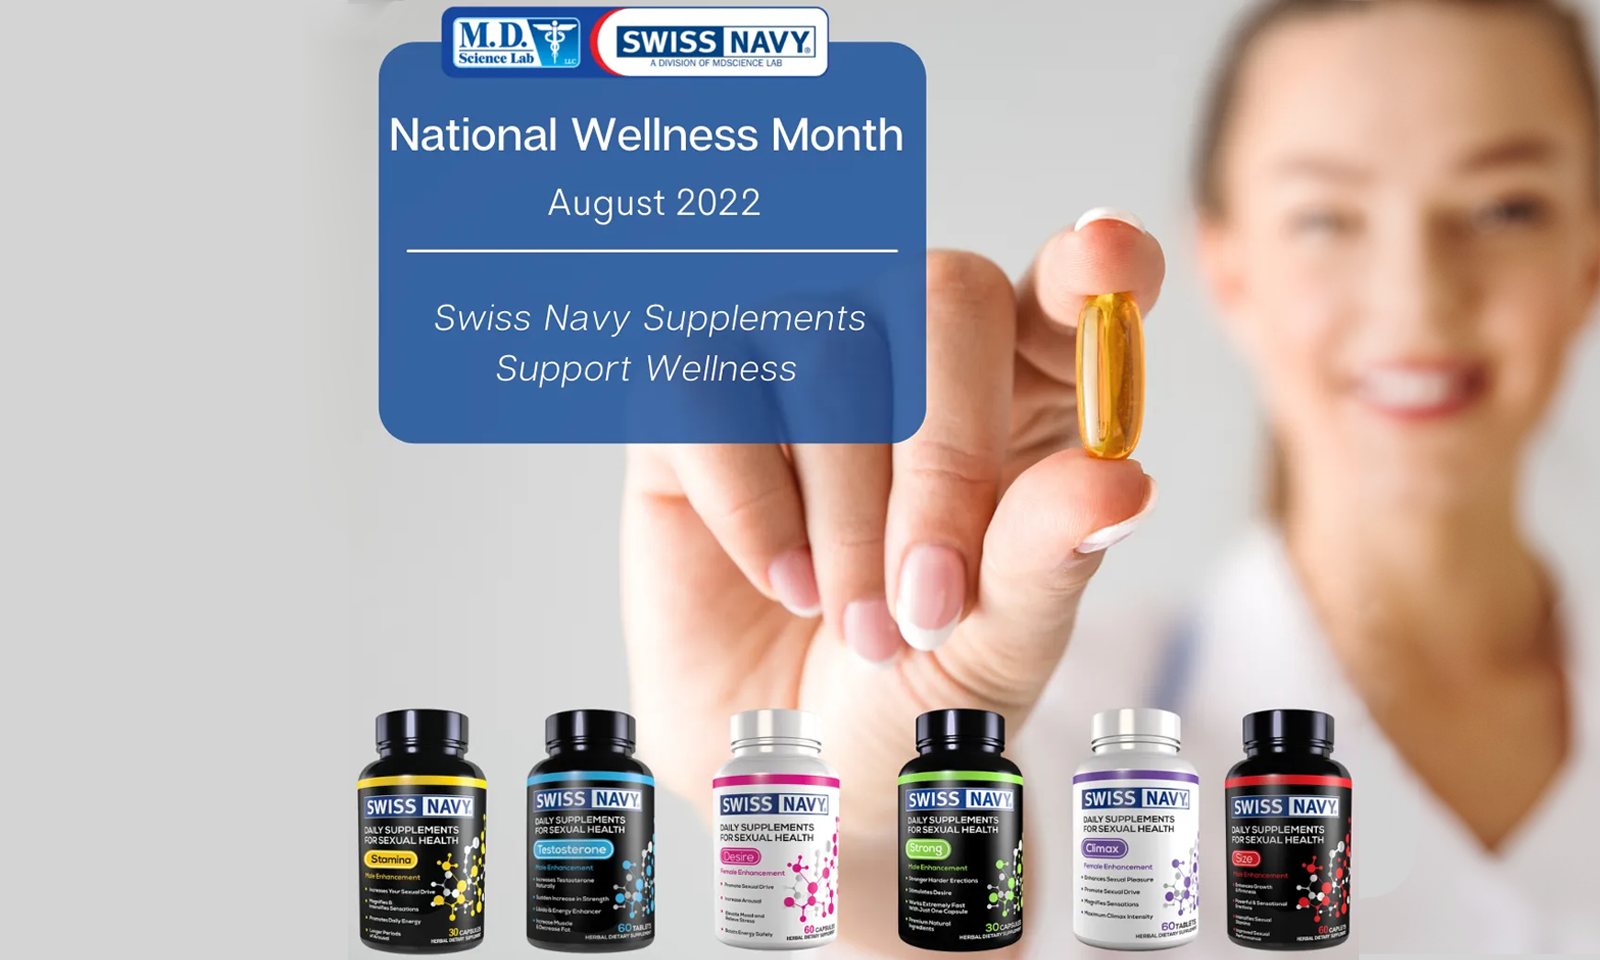 Swiss Navy Celebrates National Wellness Month With Supplements